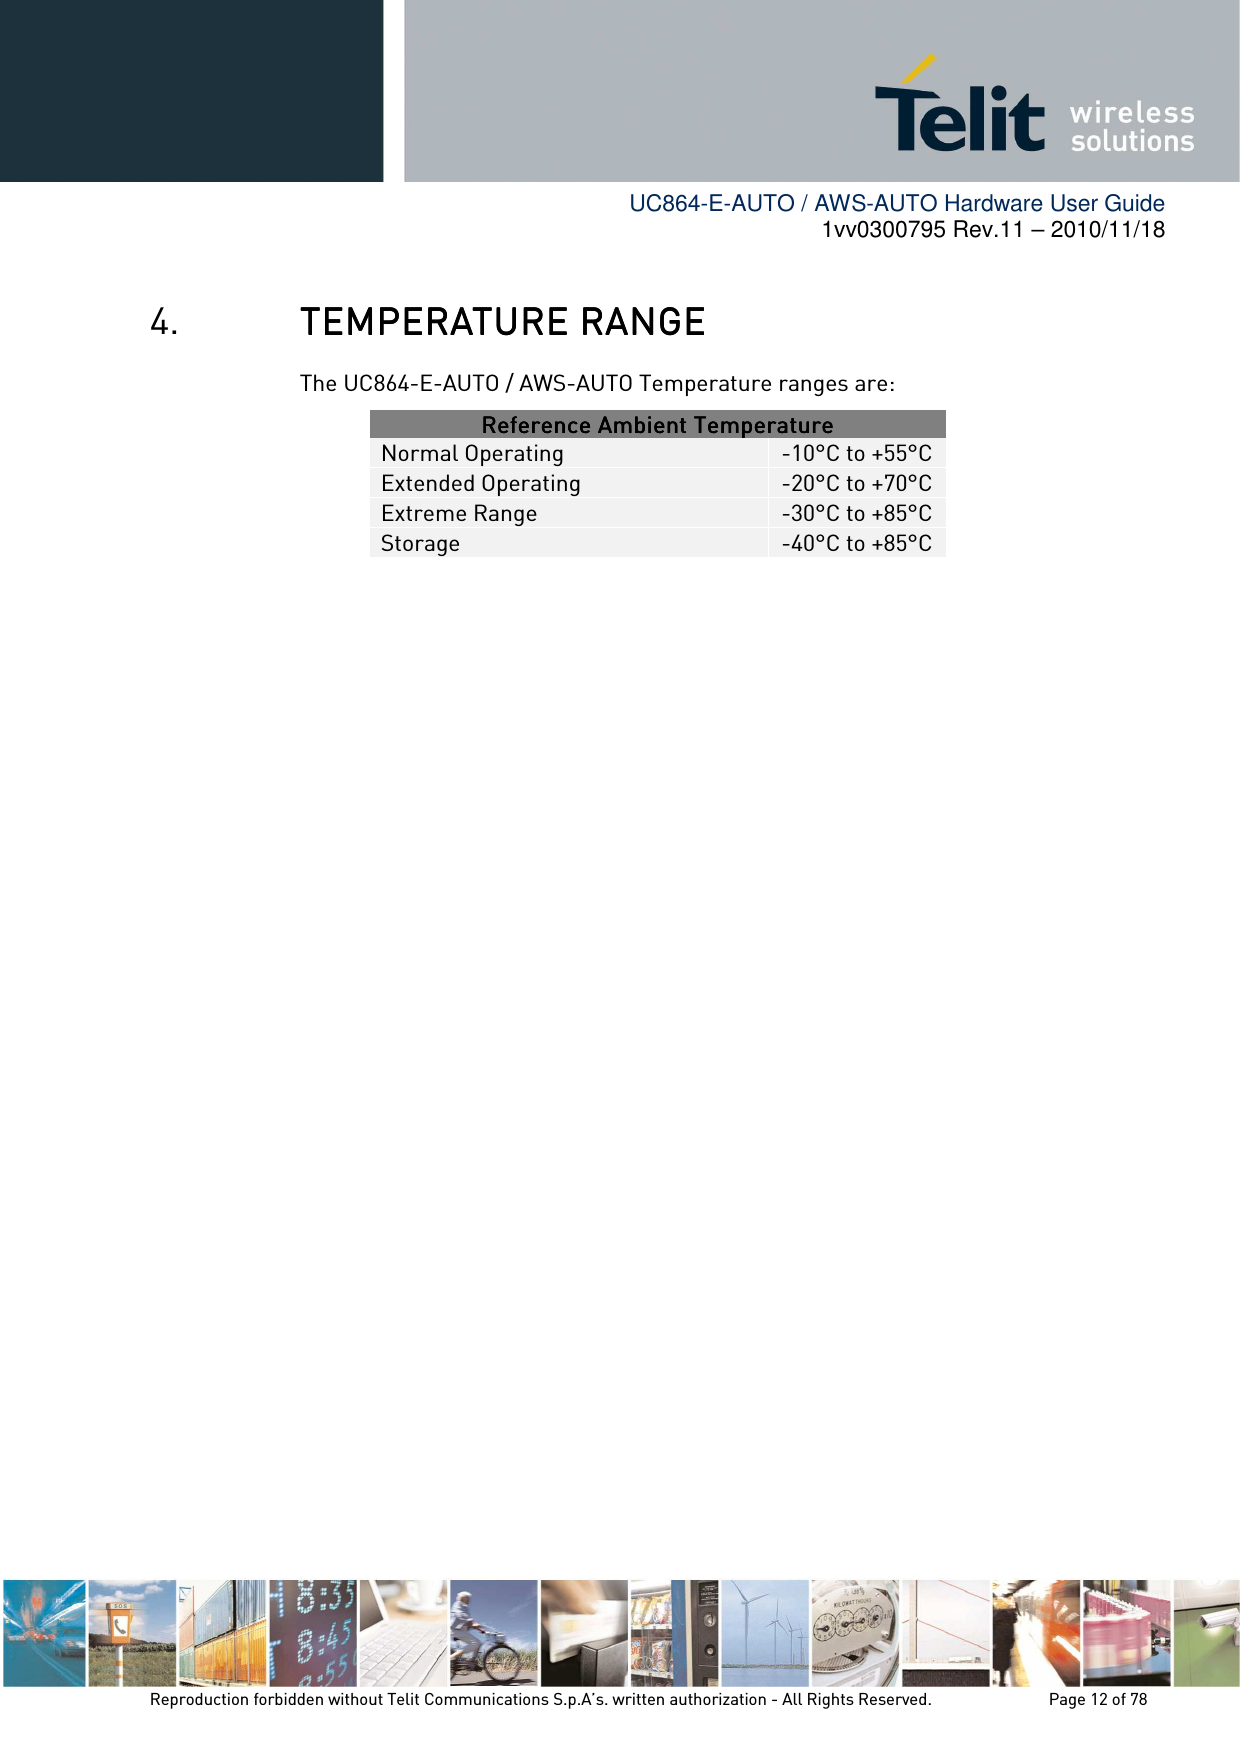        UC864-E-AUTO / AWS-AUTO Hardware User Guide 1vv0300795 Rev.11 – 2010/11/18     Reproduction forbidden without Telit Communications S.p.A’s. written authorization - All Rights Reserved.    Page 12 of 78  4. TEMPERATURE RANGETEMPERATURE RANGETEMPERATURE RANGETEMPERATURE RANGE    The UC864-E-AUTO / AWS-AUTO Temperature ranges are: Reference Ambient TemperatureReference Ambient TemperatureReference Ambient TemperatureReference Ambient Temperature    Normal Operating  -10°C to +55°C Extended Operating  -20°C to +70°C Extreme Range  -30°C to +85°C Storage  -40°C to +85°C             